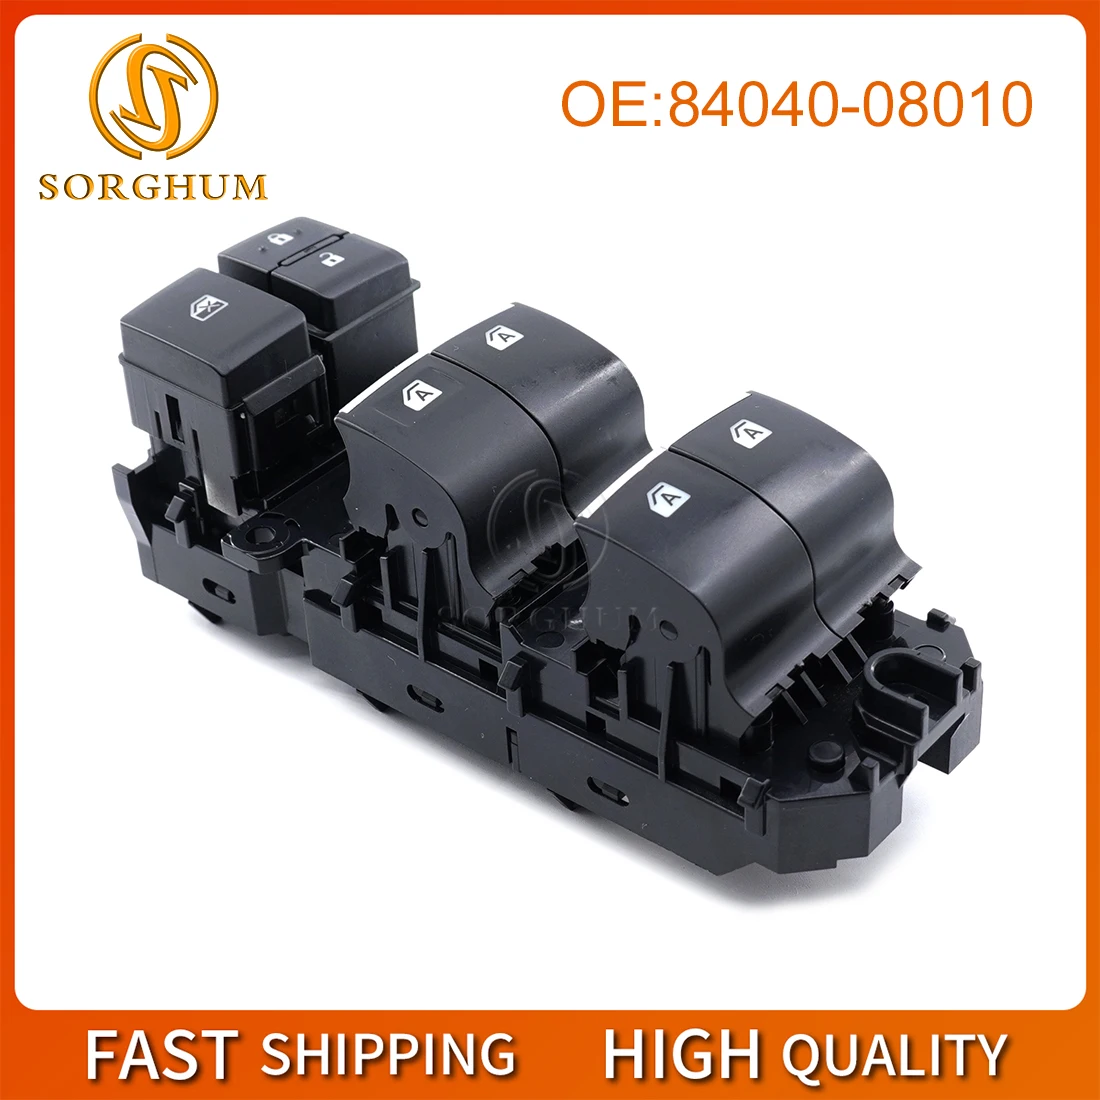 

Sorghum 84040-08010 Front Driver Car Window Power Master Lifter Switch For 2018-2020 Toyota Camry Corolla 8404006070 840403317